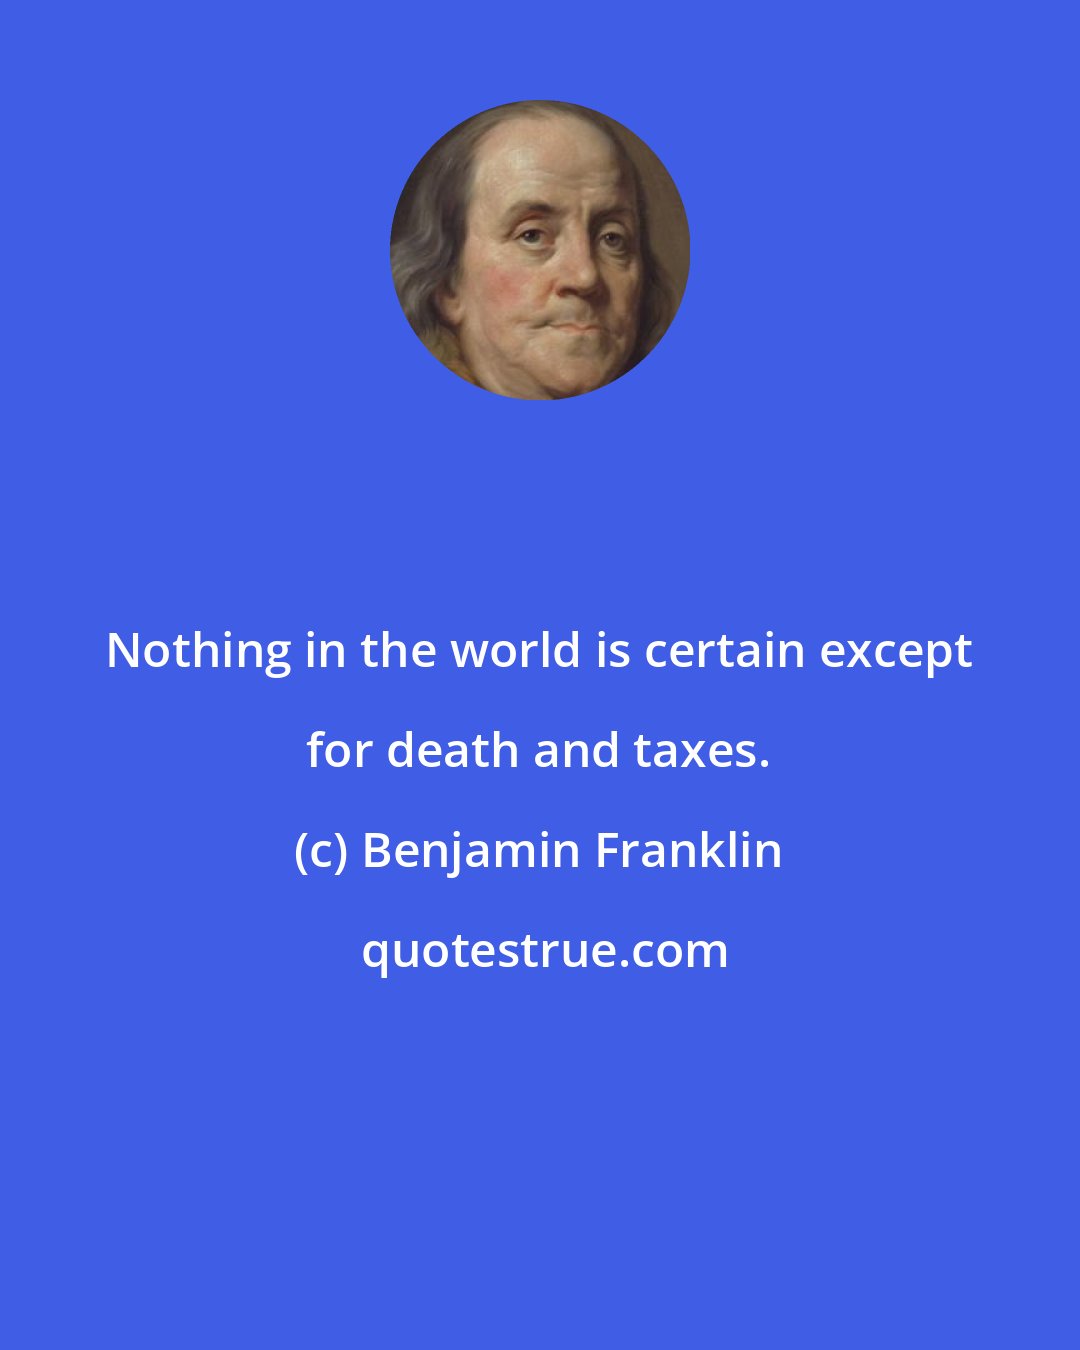 Benjamin Franklin: Nothing in the world is certain except for death and taxes.